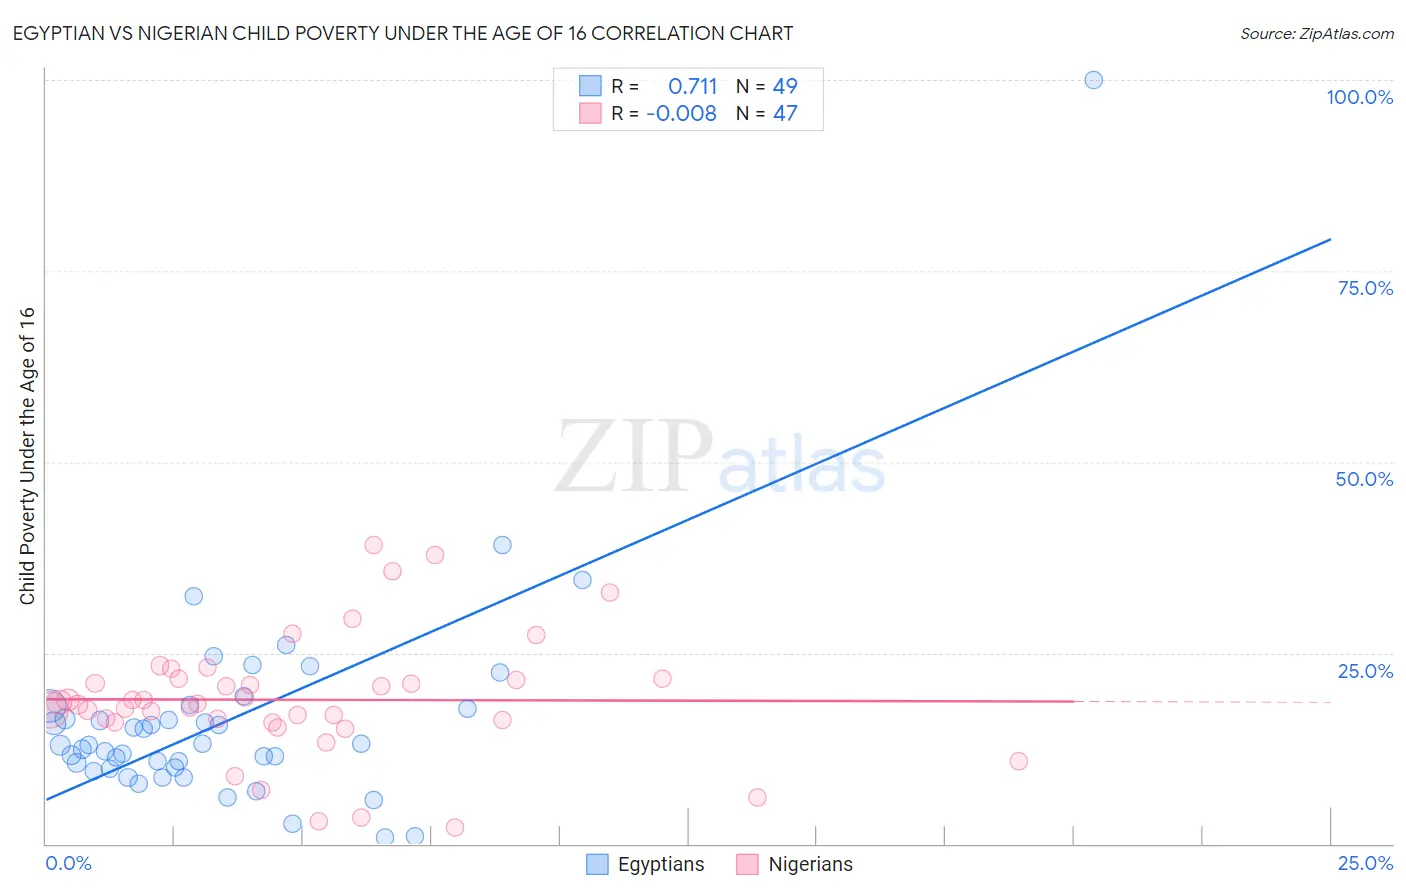 Egyptian vs Nigerian Child Poverty Under the Age of 16